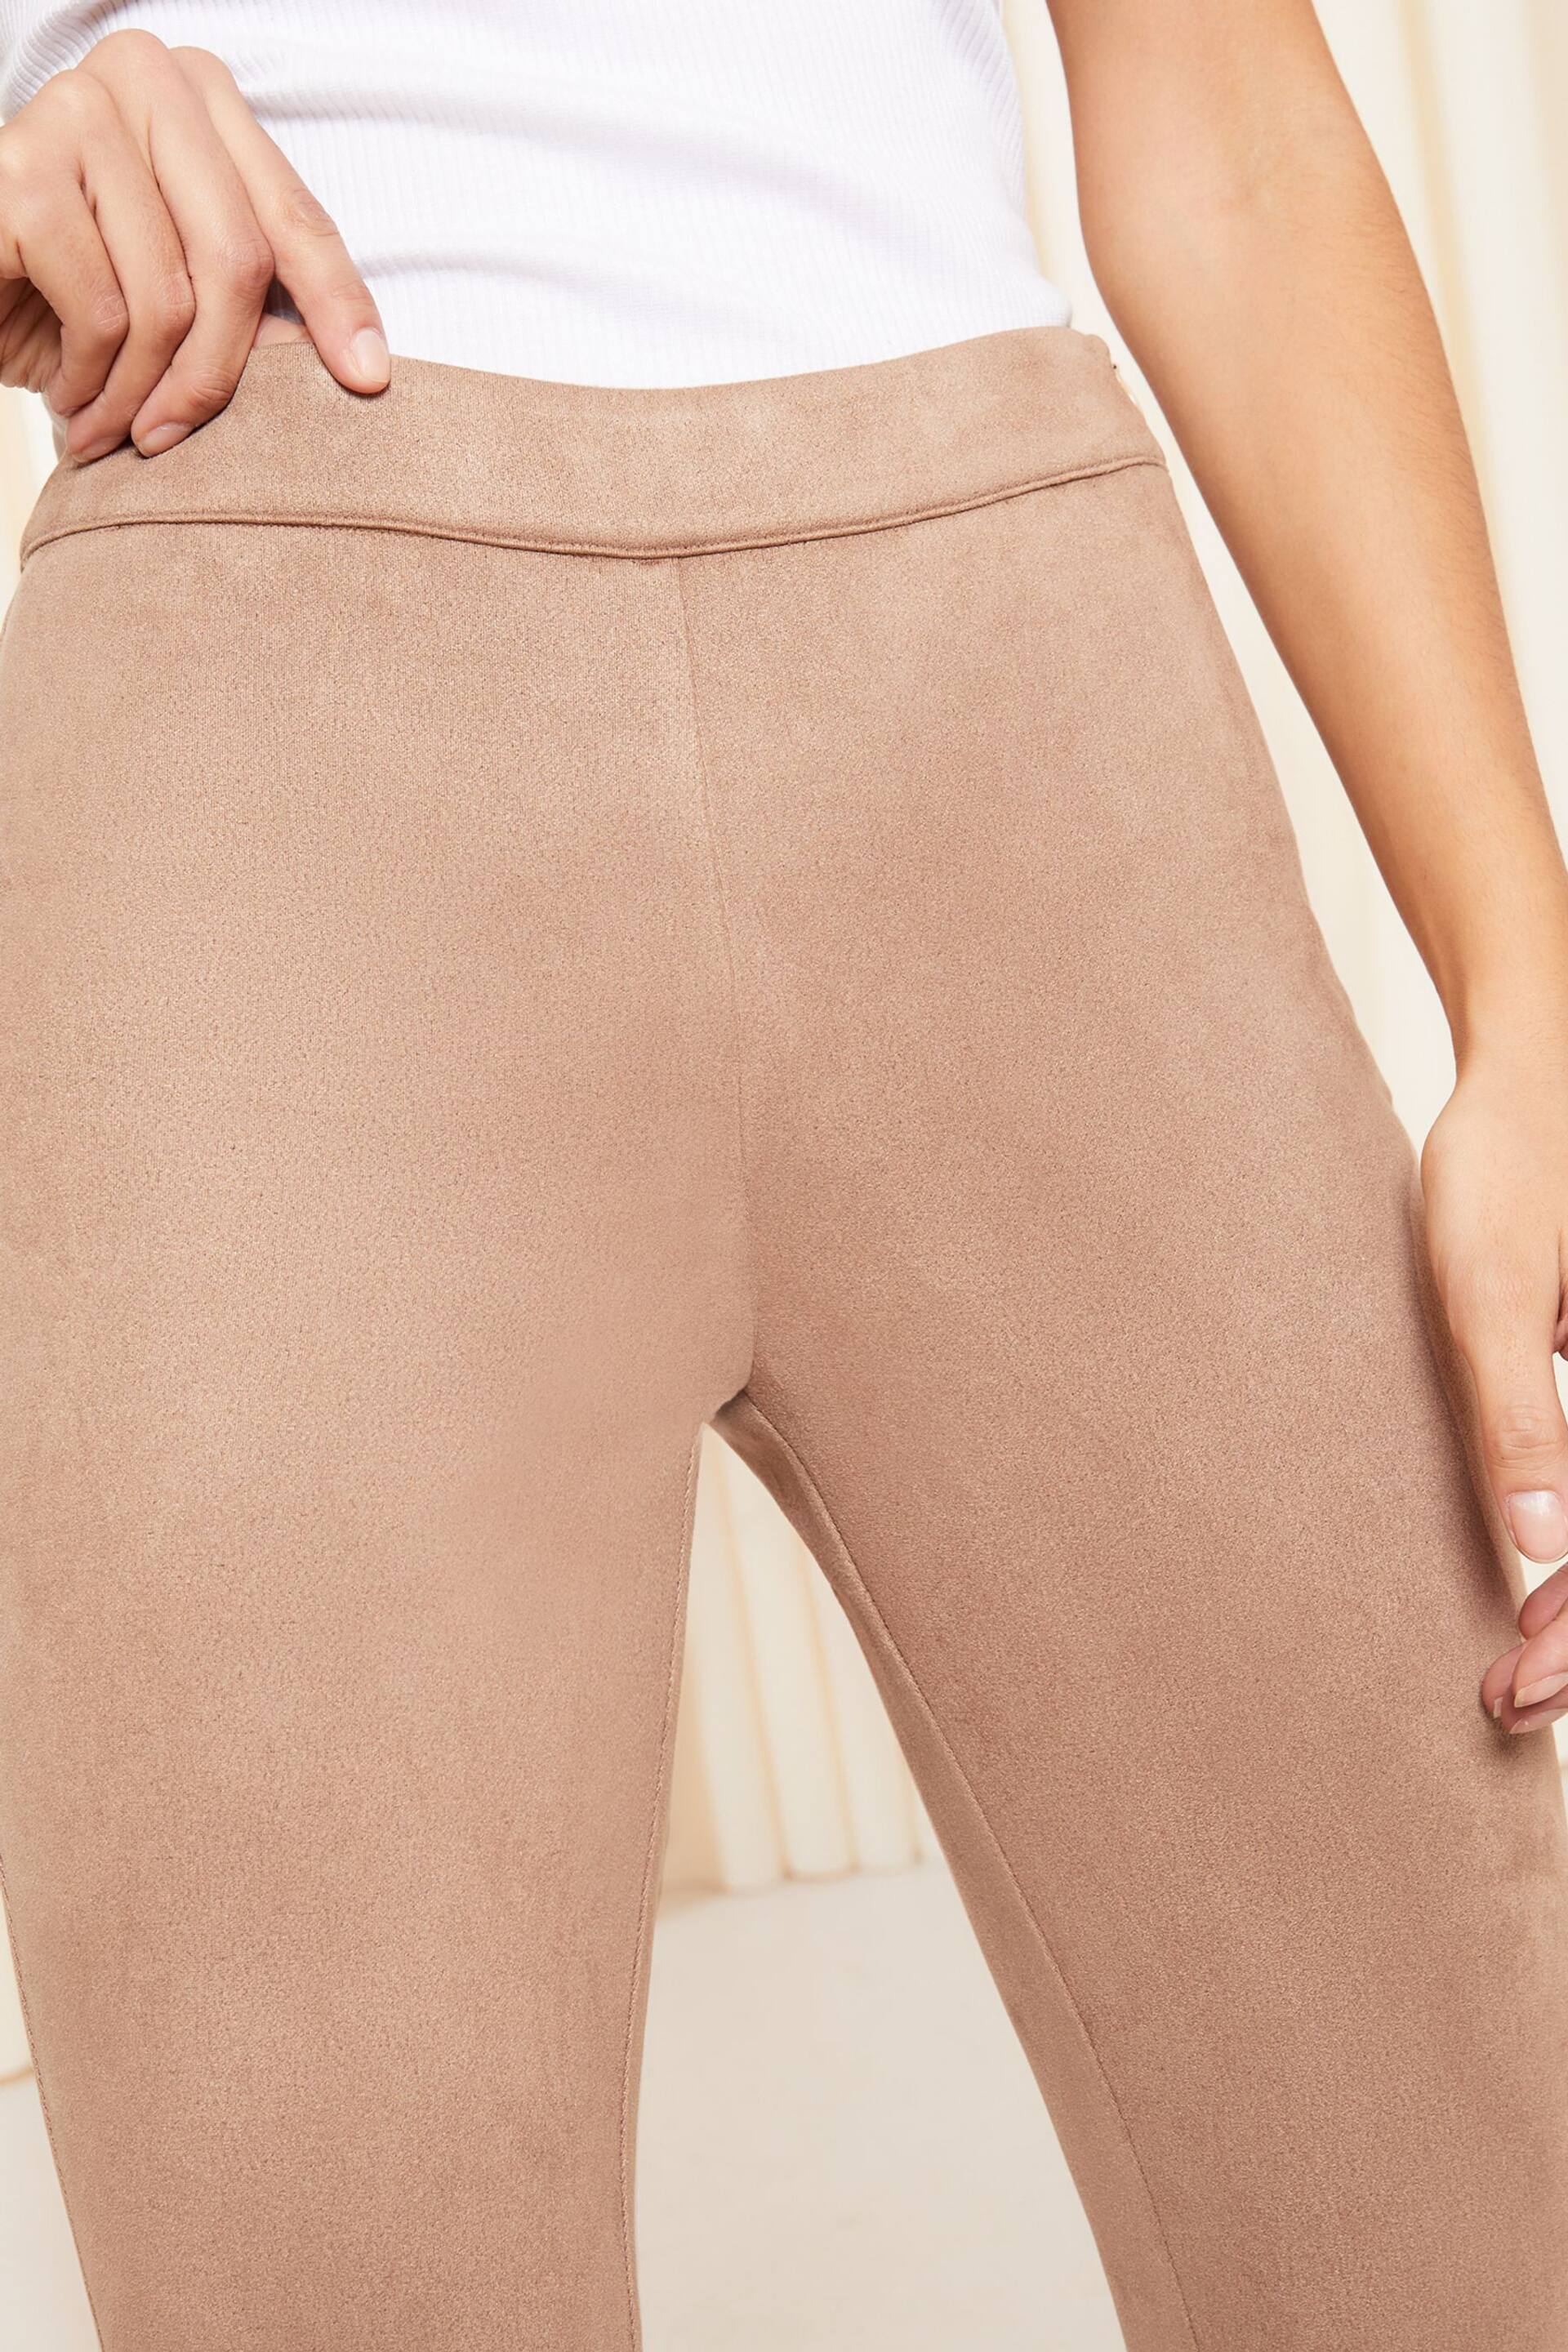 Friends Like These Neutral Faux Suede Legging - Image 4 of 4